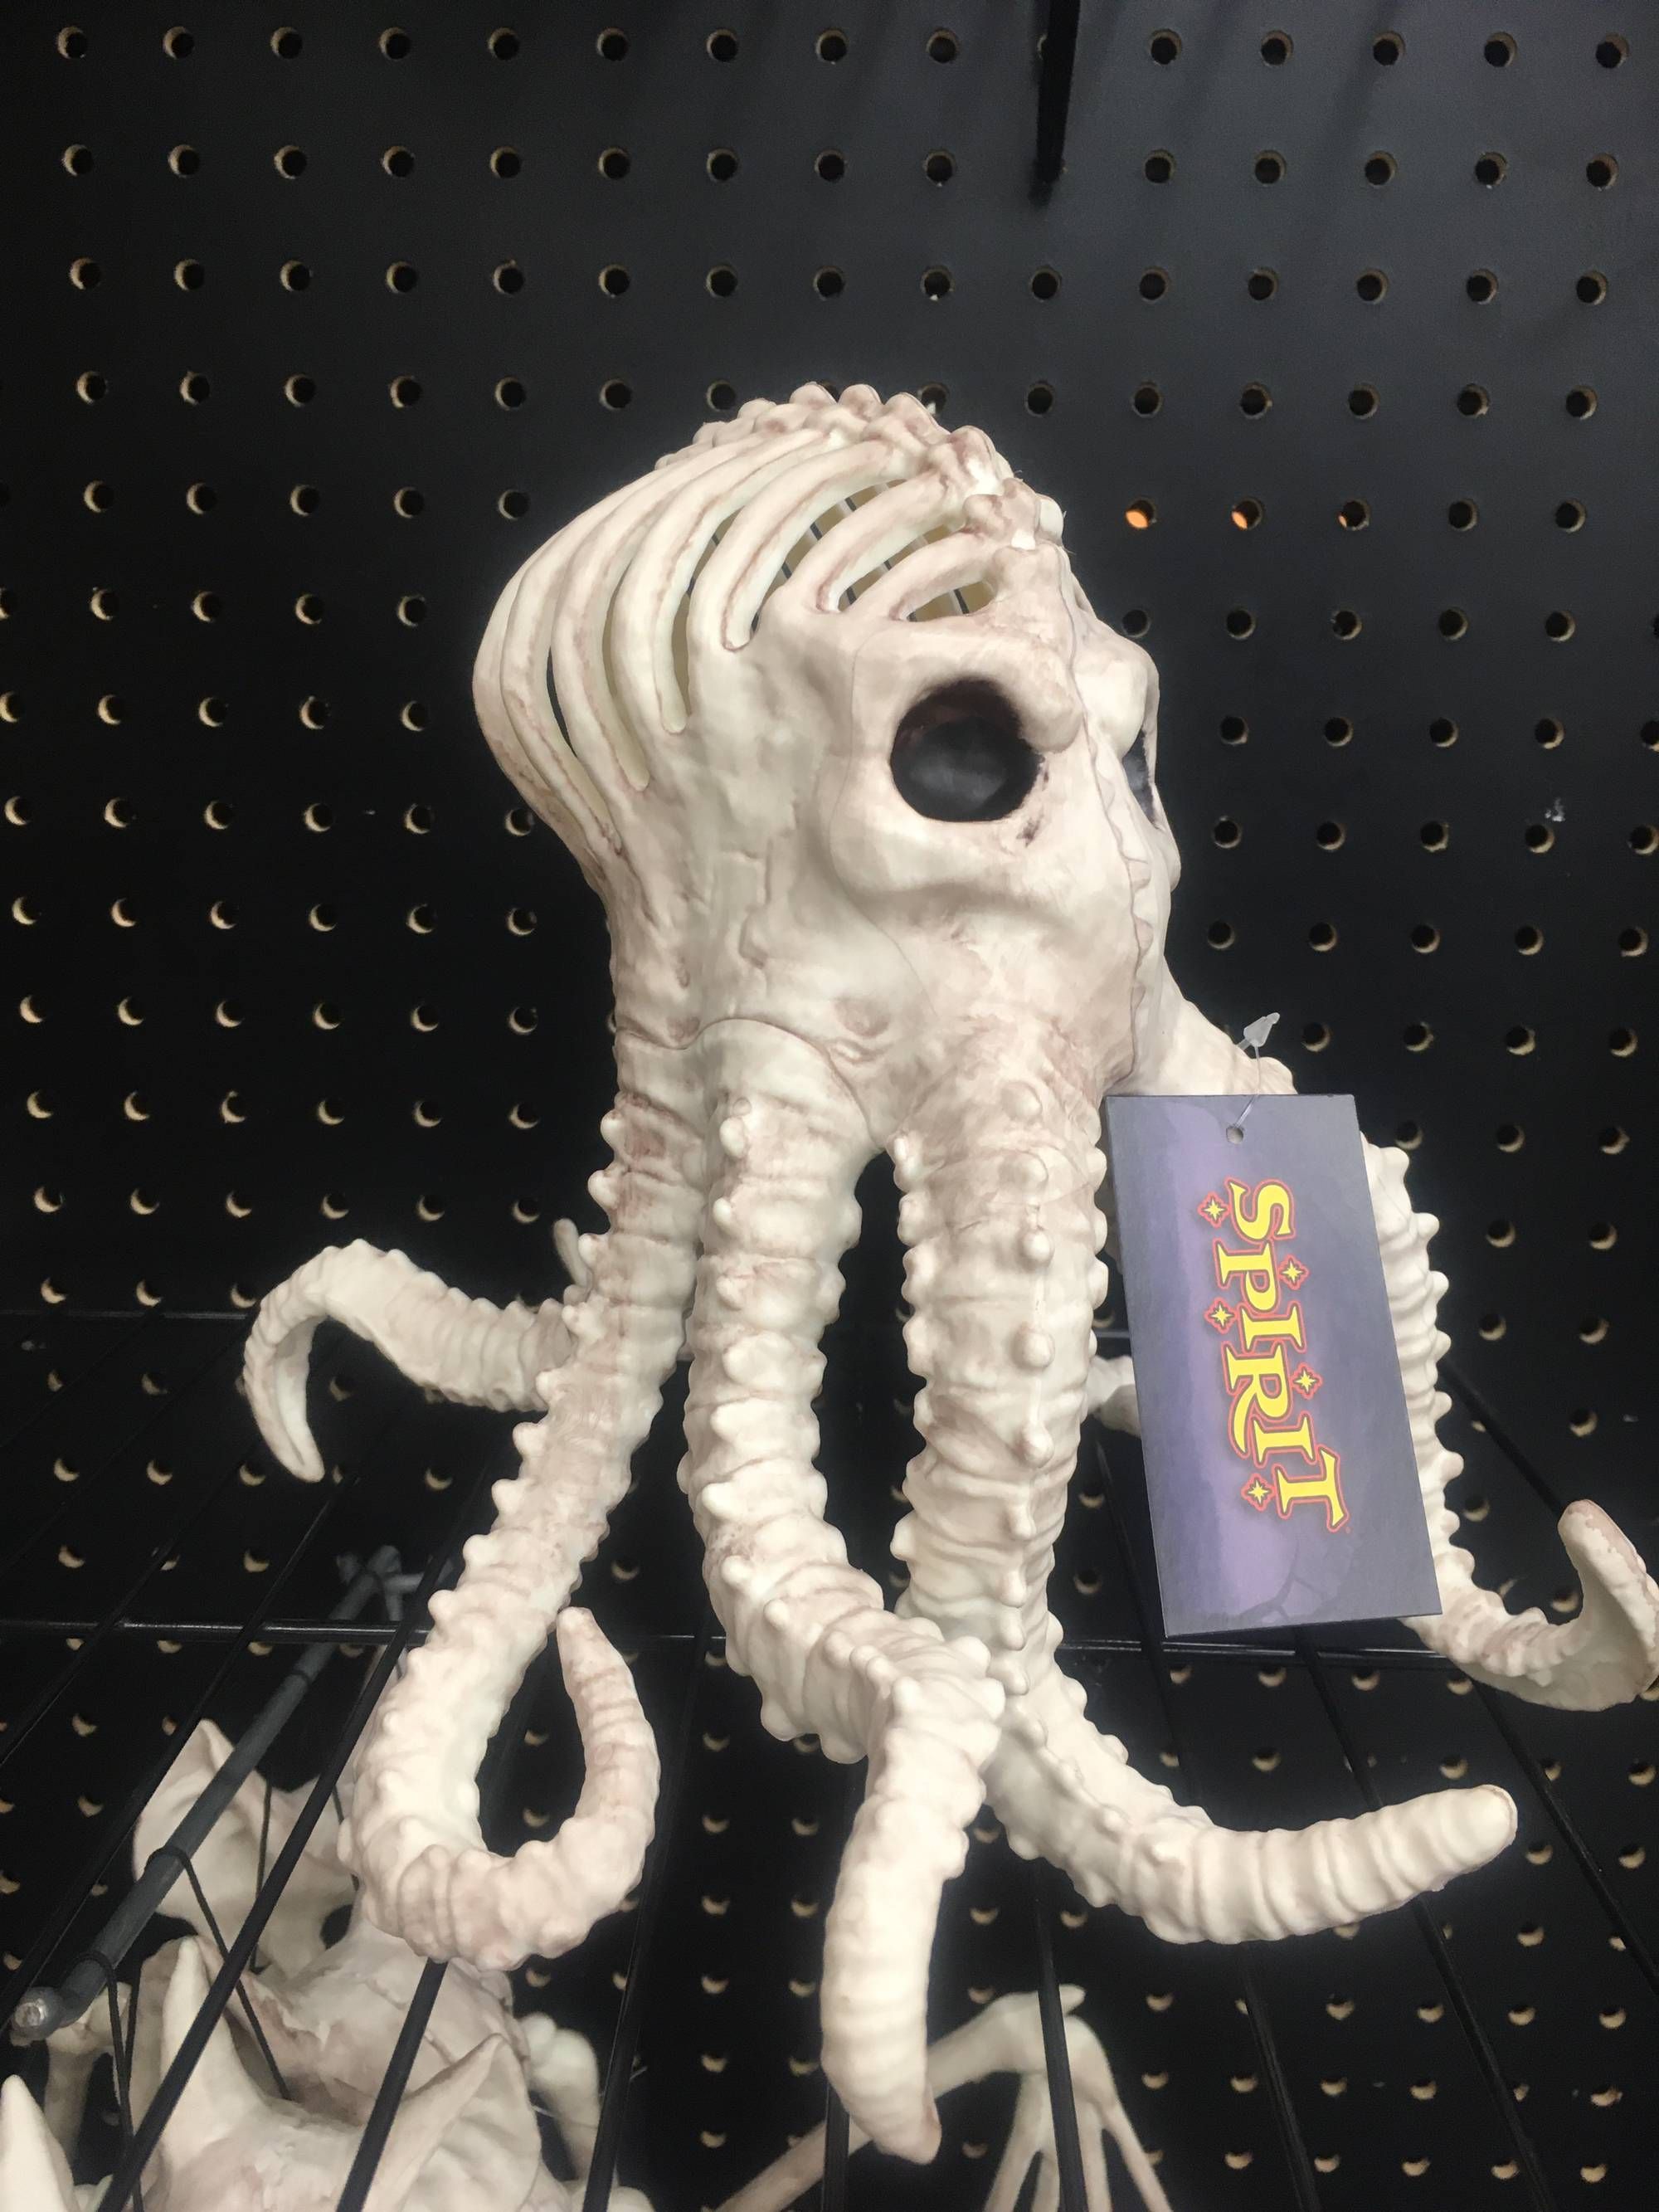 I’m all for Halloween decorations, but I draw the line at skeletons of invertebrates.